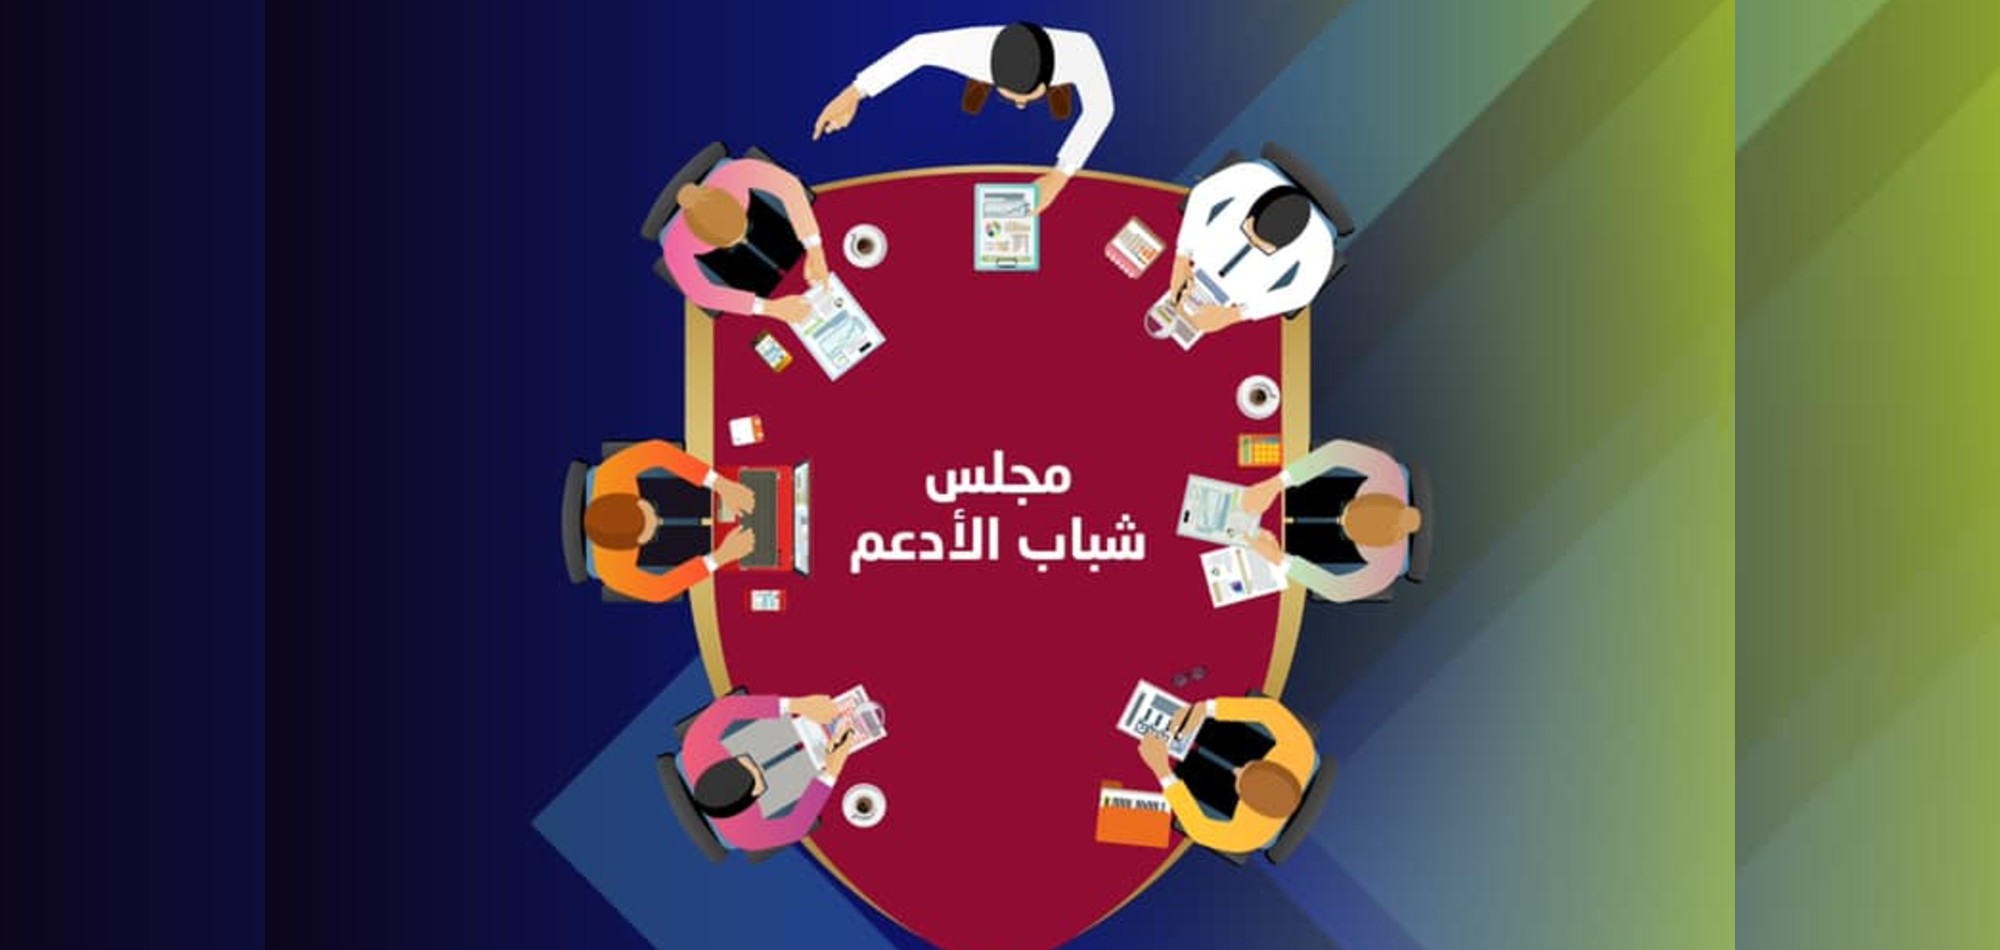 QOC Launches Al Adaam Youth Council Initiative